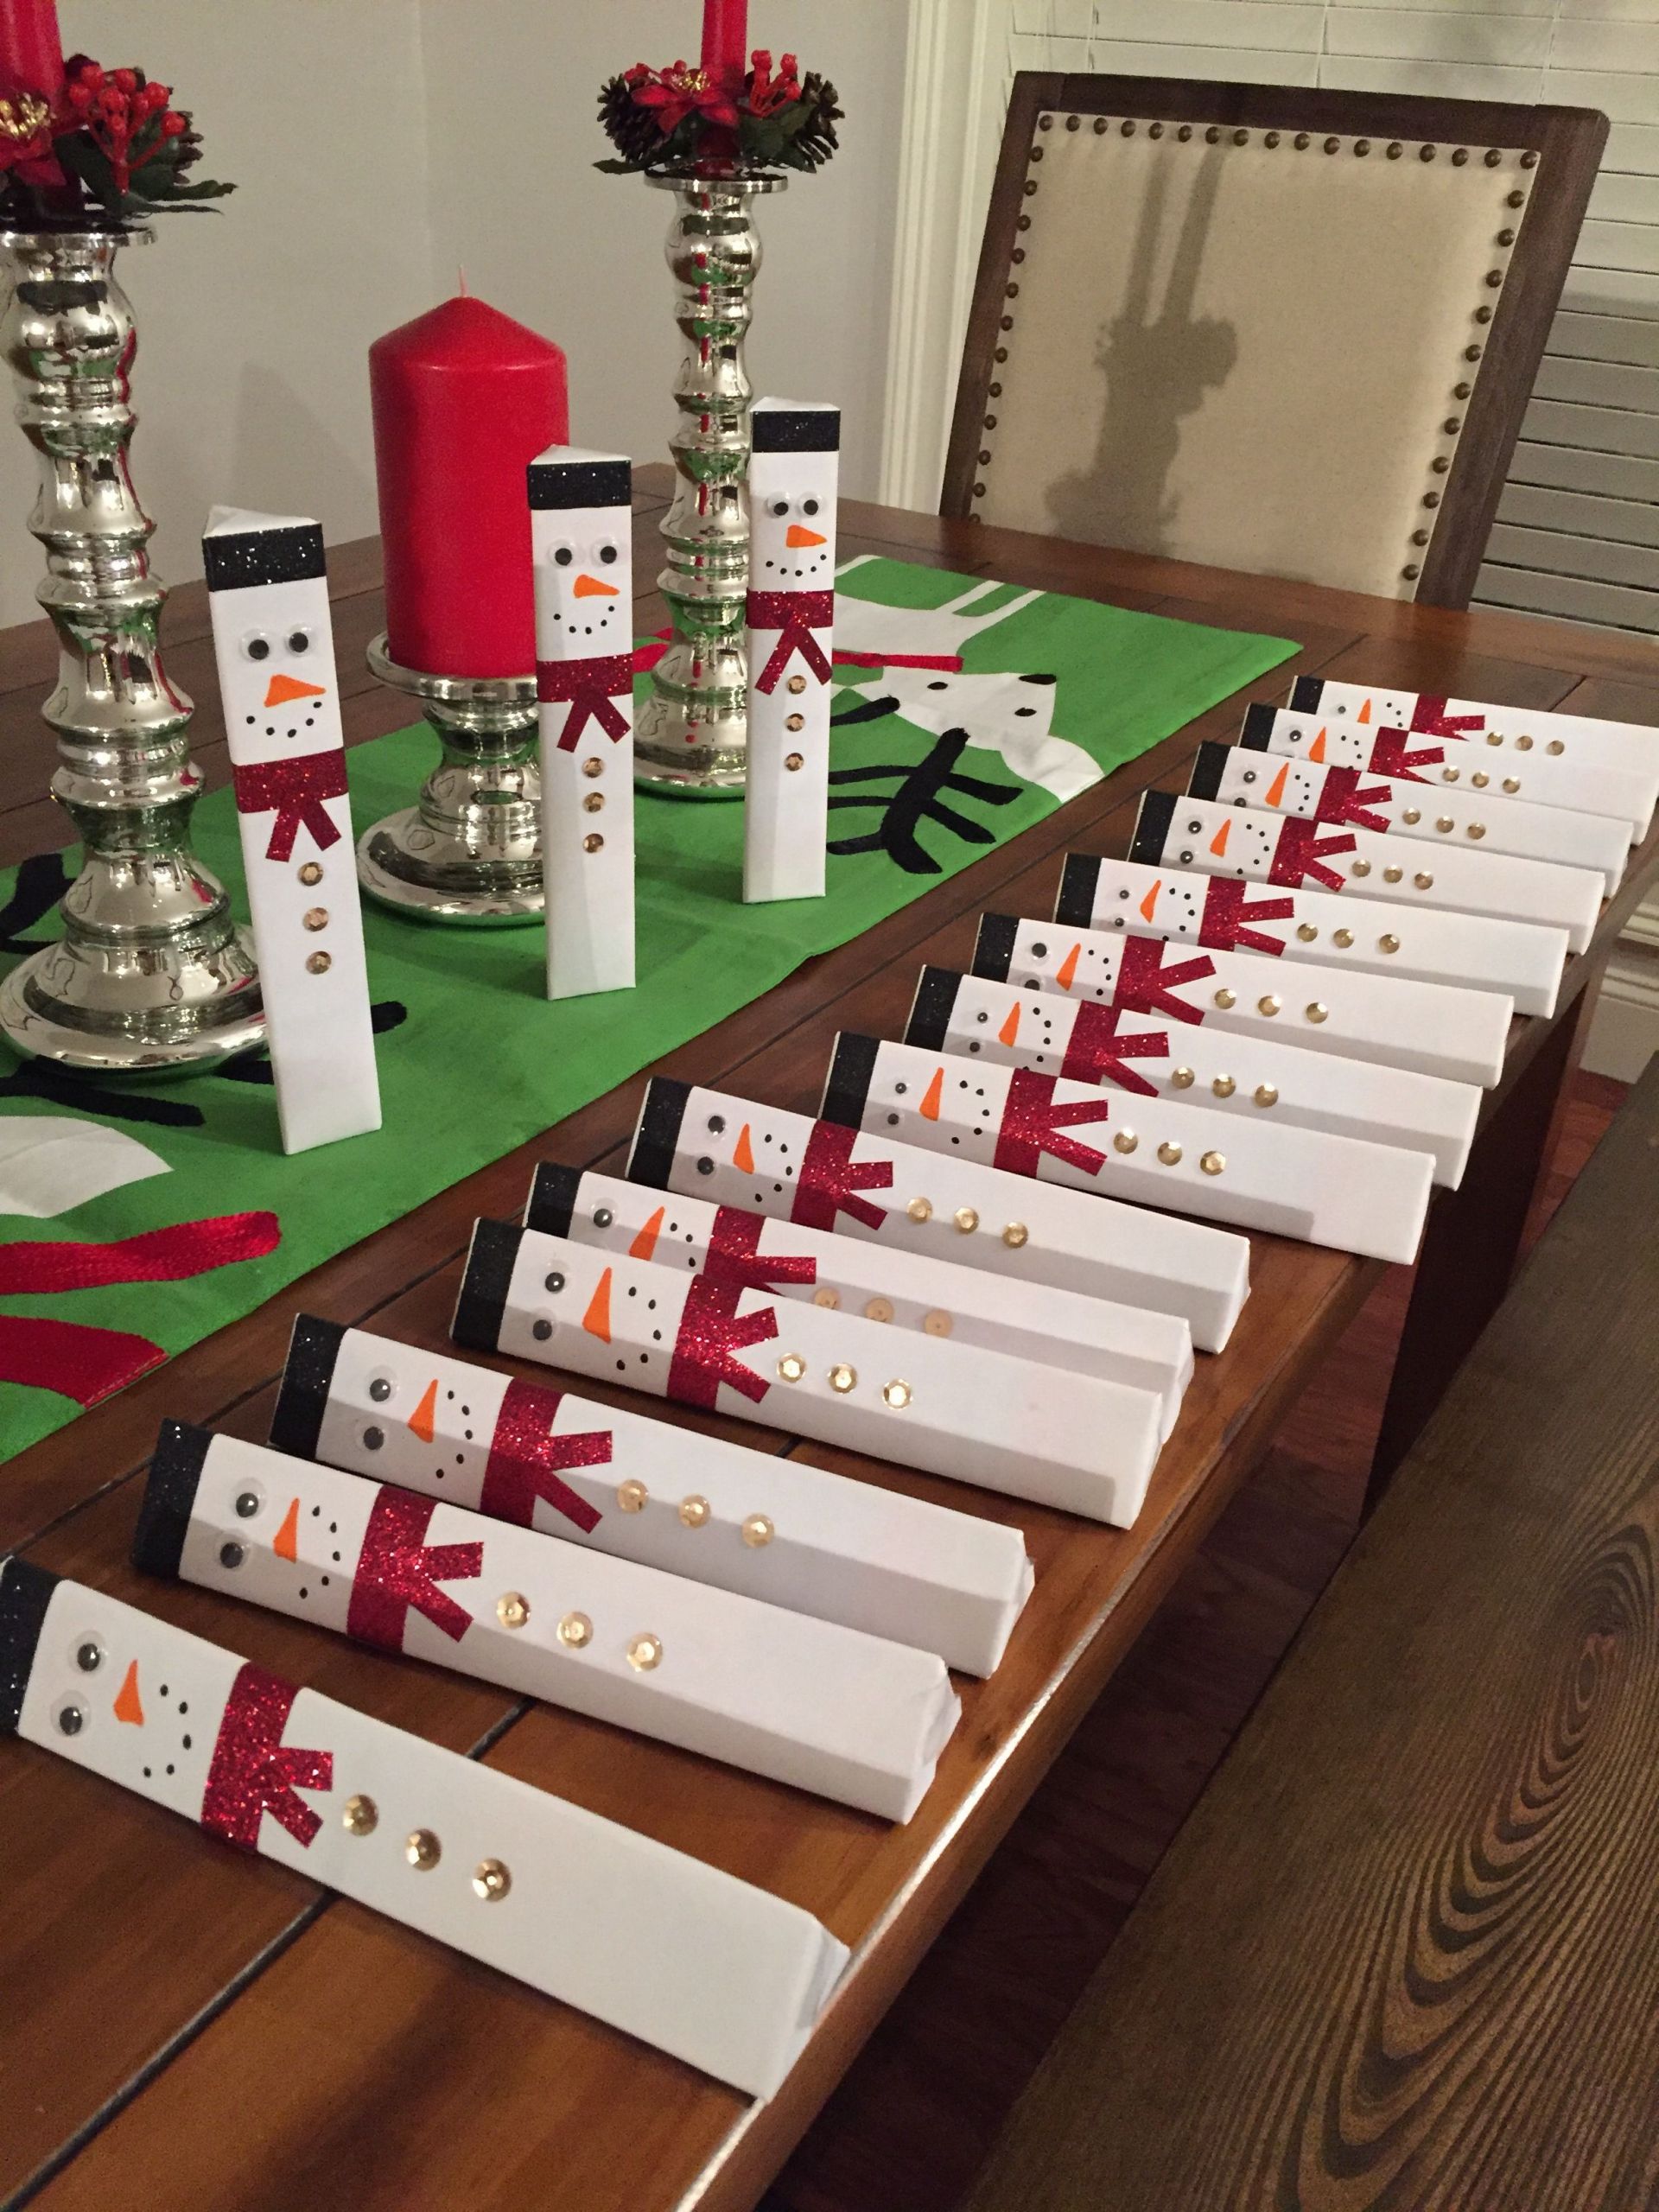 small christmas gift ideas for coworkers Toblerone chocolate dressed as a snowman for Christmas Excellent co